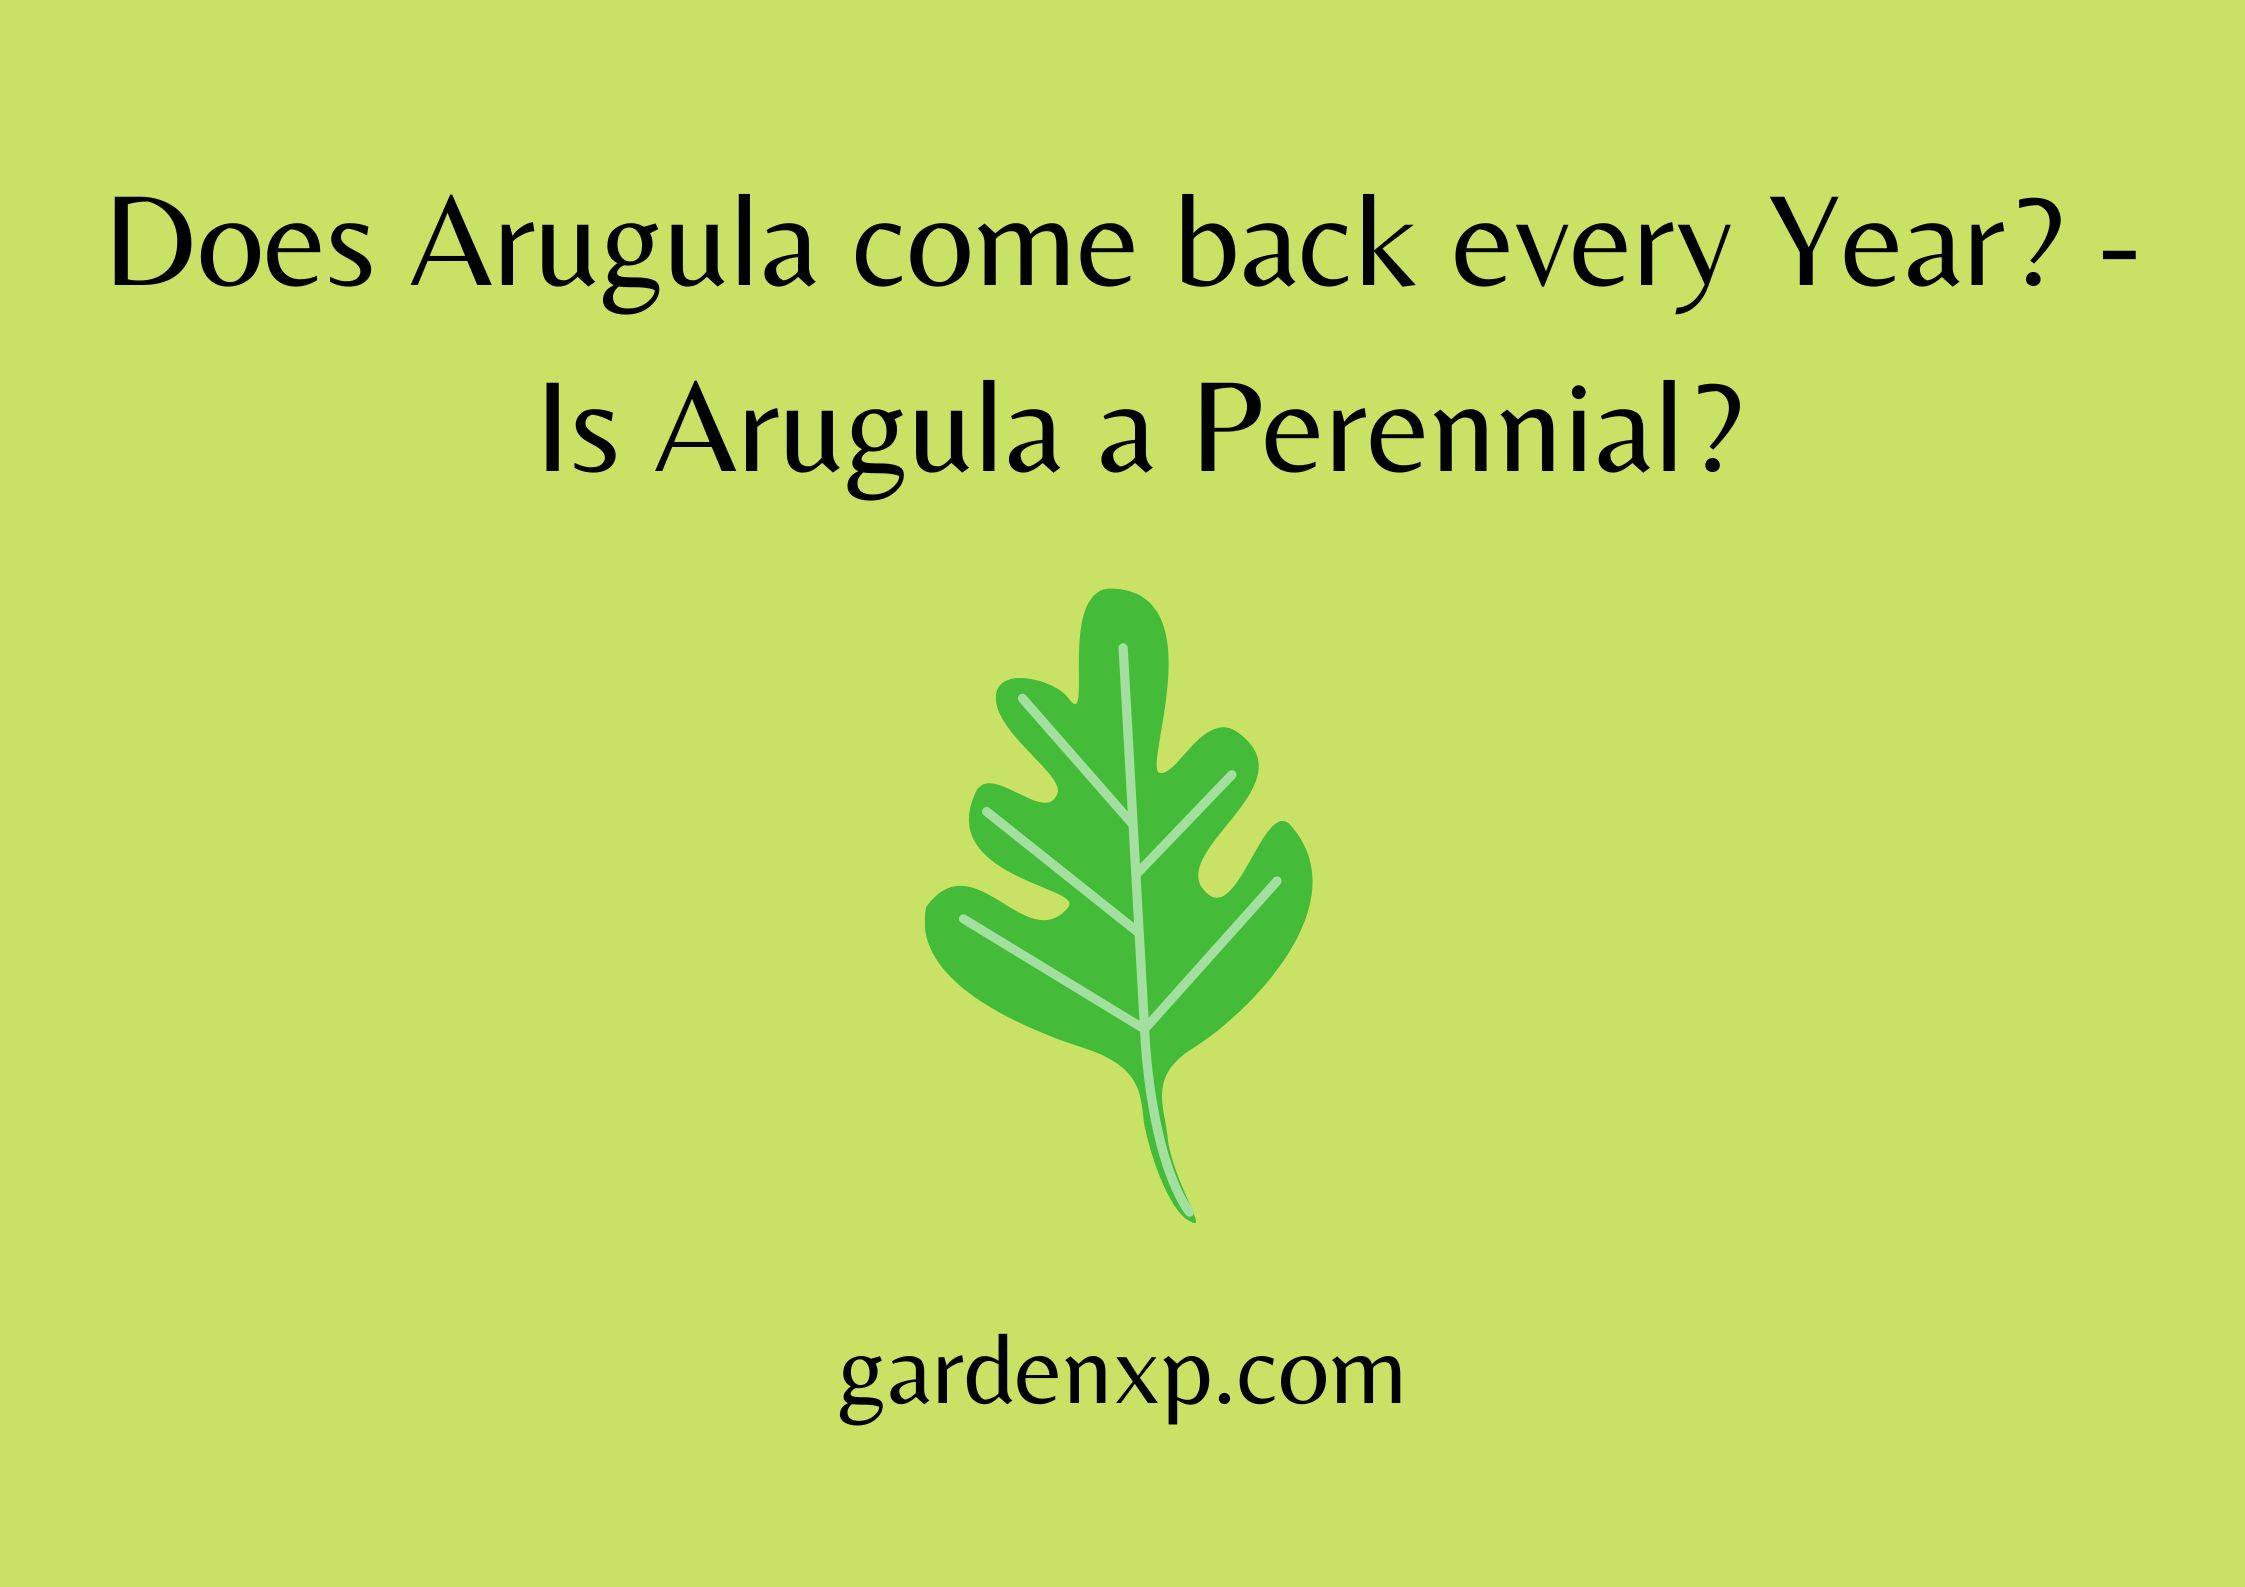 Does Arugula come back every Year? - Is Arugula a Perennial?